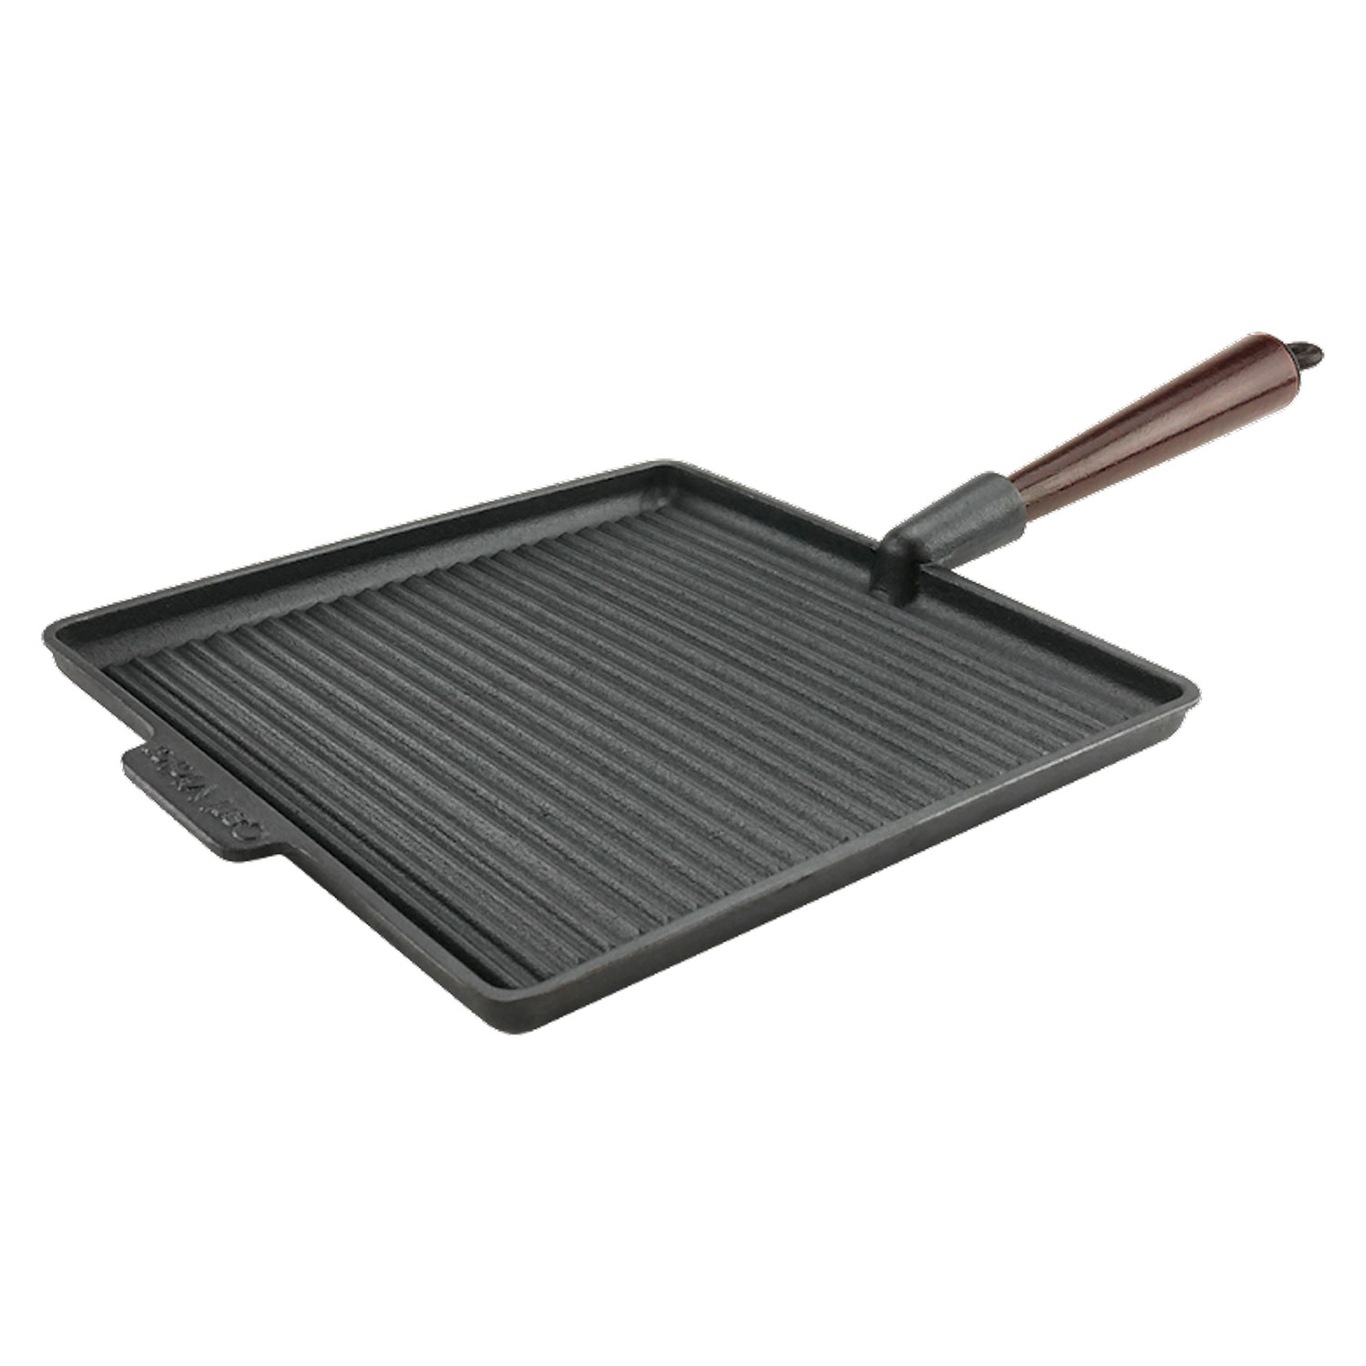 Squared Grill Pan 28x28 cm With Wooden Handle